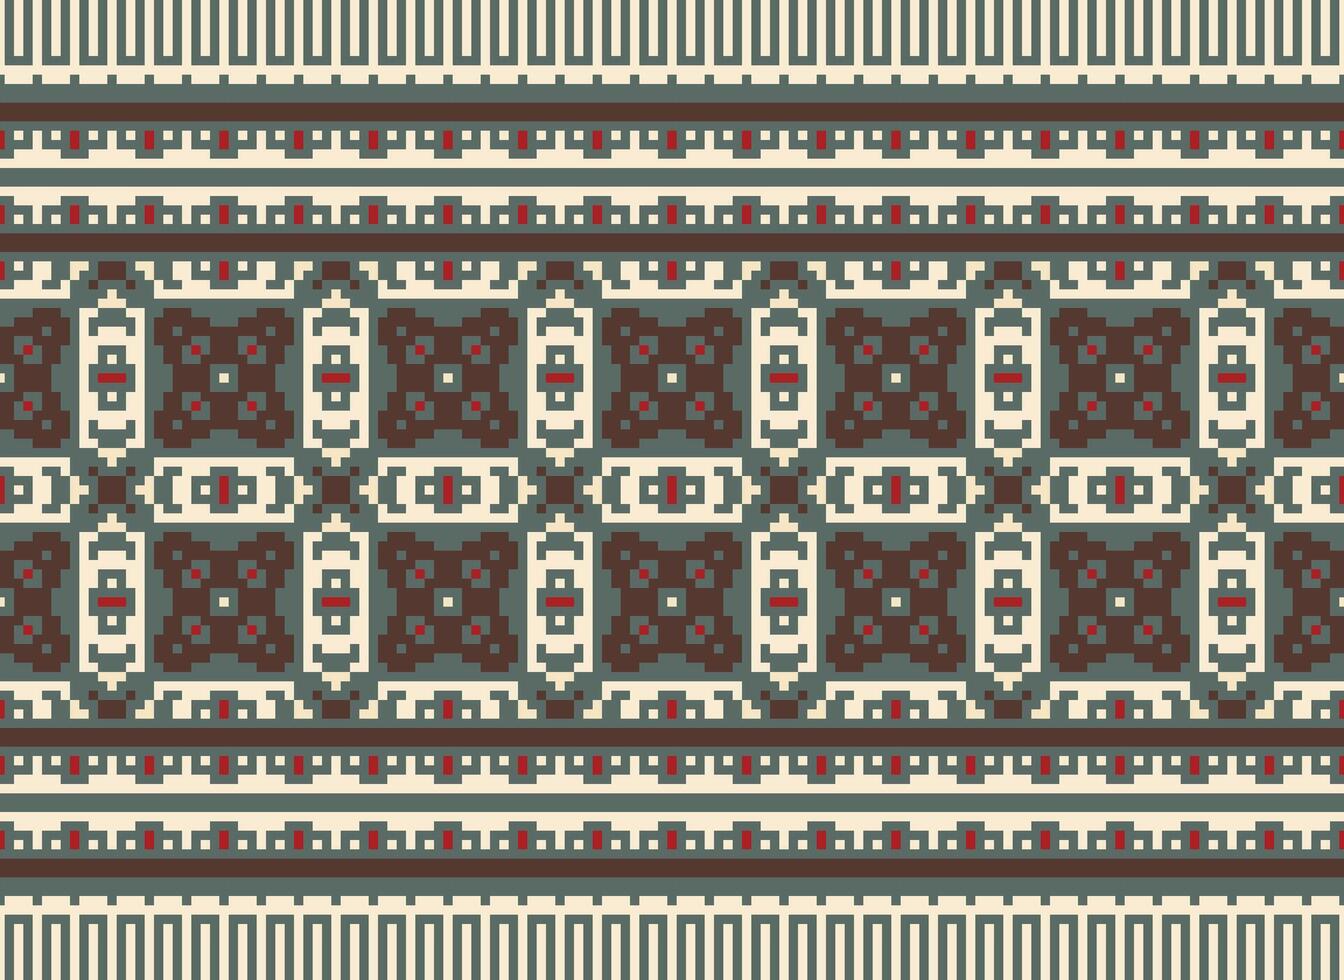 Cross Stitch Embroidery. Ethnic Patterns. Native Style. Traditional Design for texture, textile, fabric, clothing, Knitwear, print. Geometric Pixel Horizontal Seamless Vector. vector